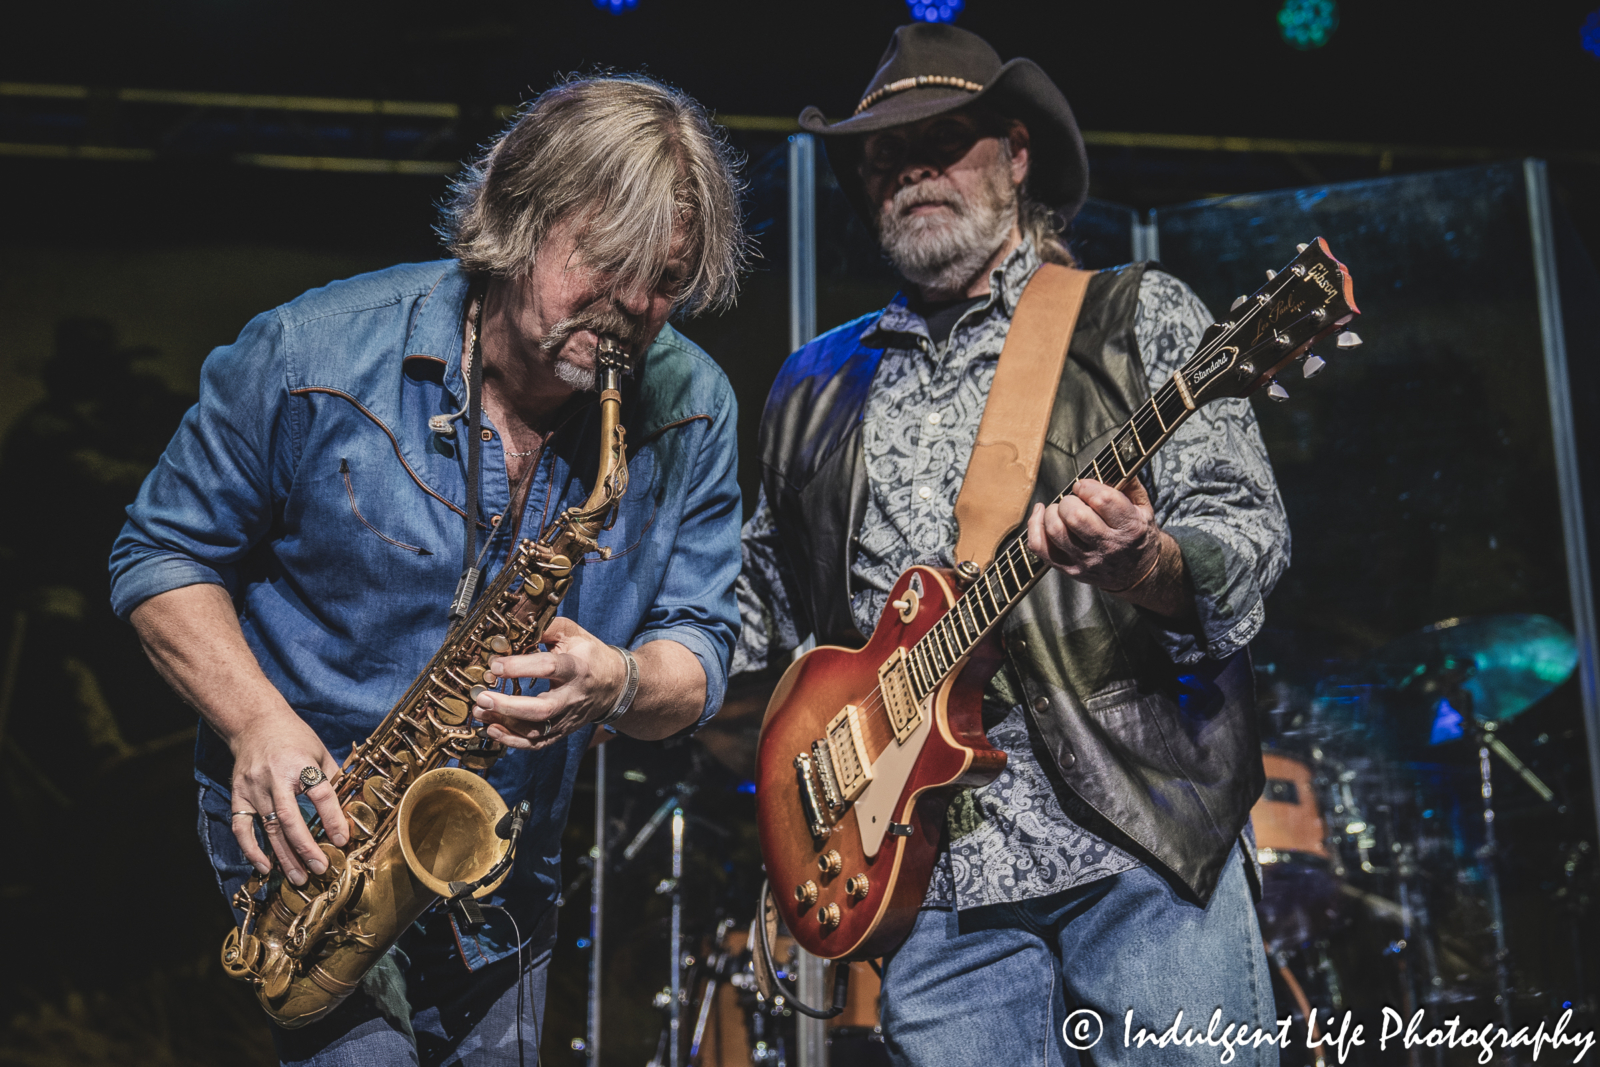 Saxophone player Marcus James Henderson and guitarist Rick Willis of The Marshall Tucker Band performing together at Ameristar Casino in Kansas City, MO on December 1, 2023